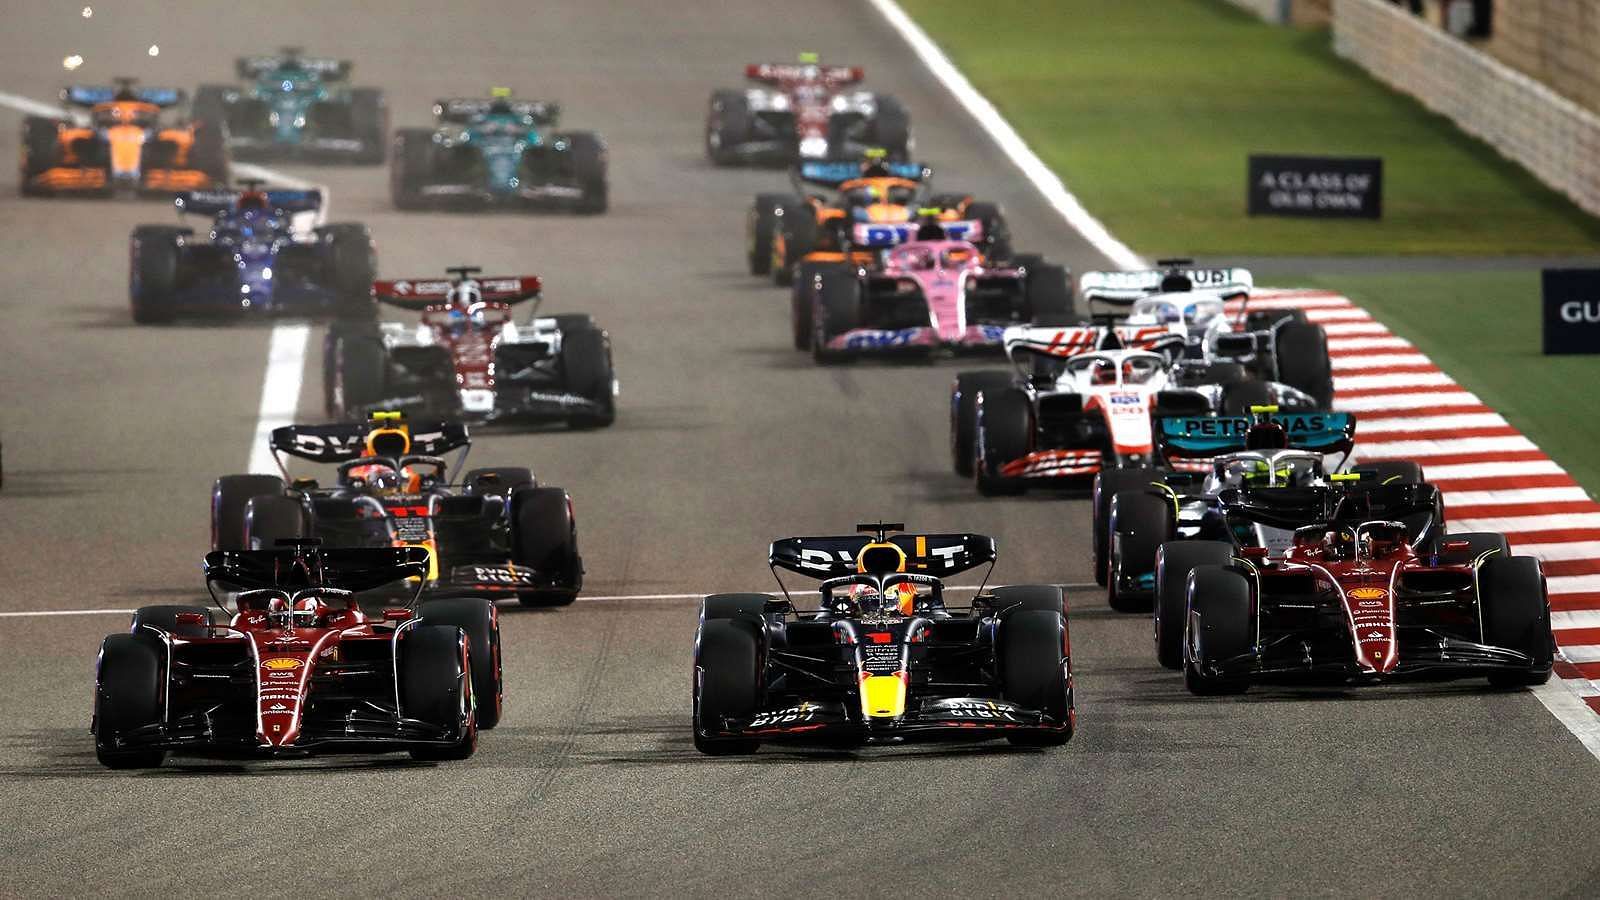 Bahrain GP will be the first race of the season